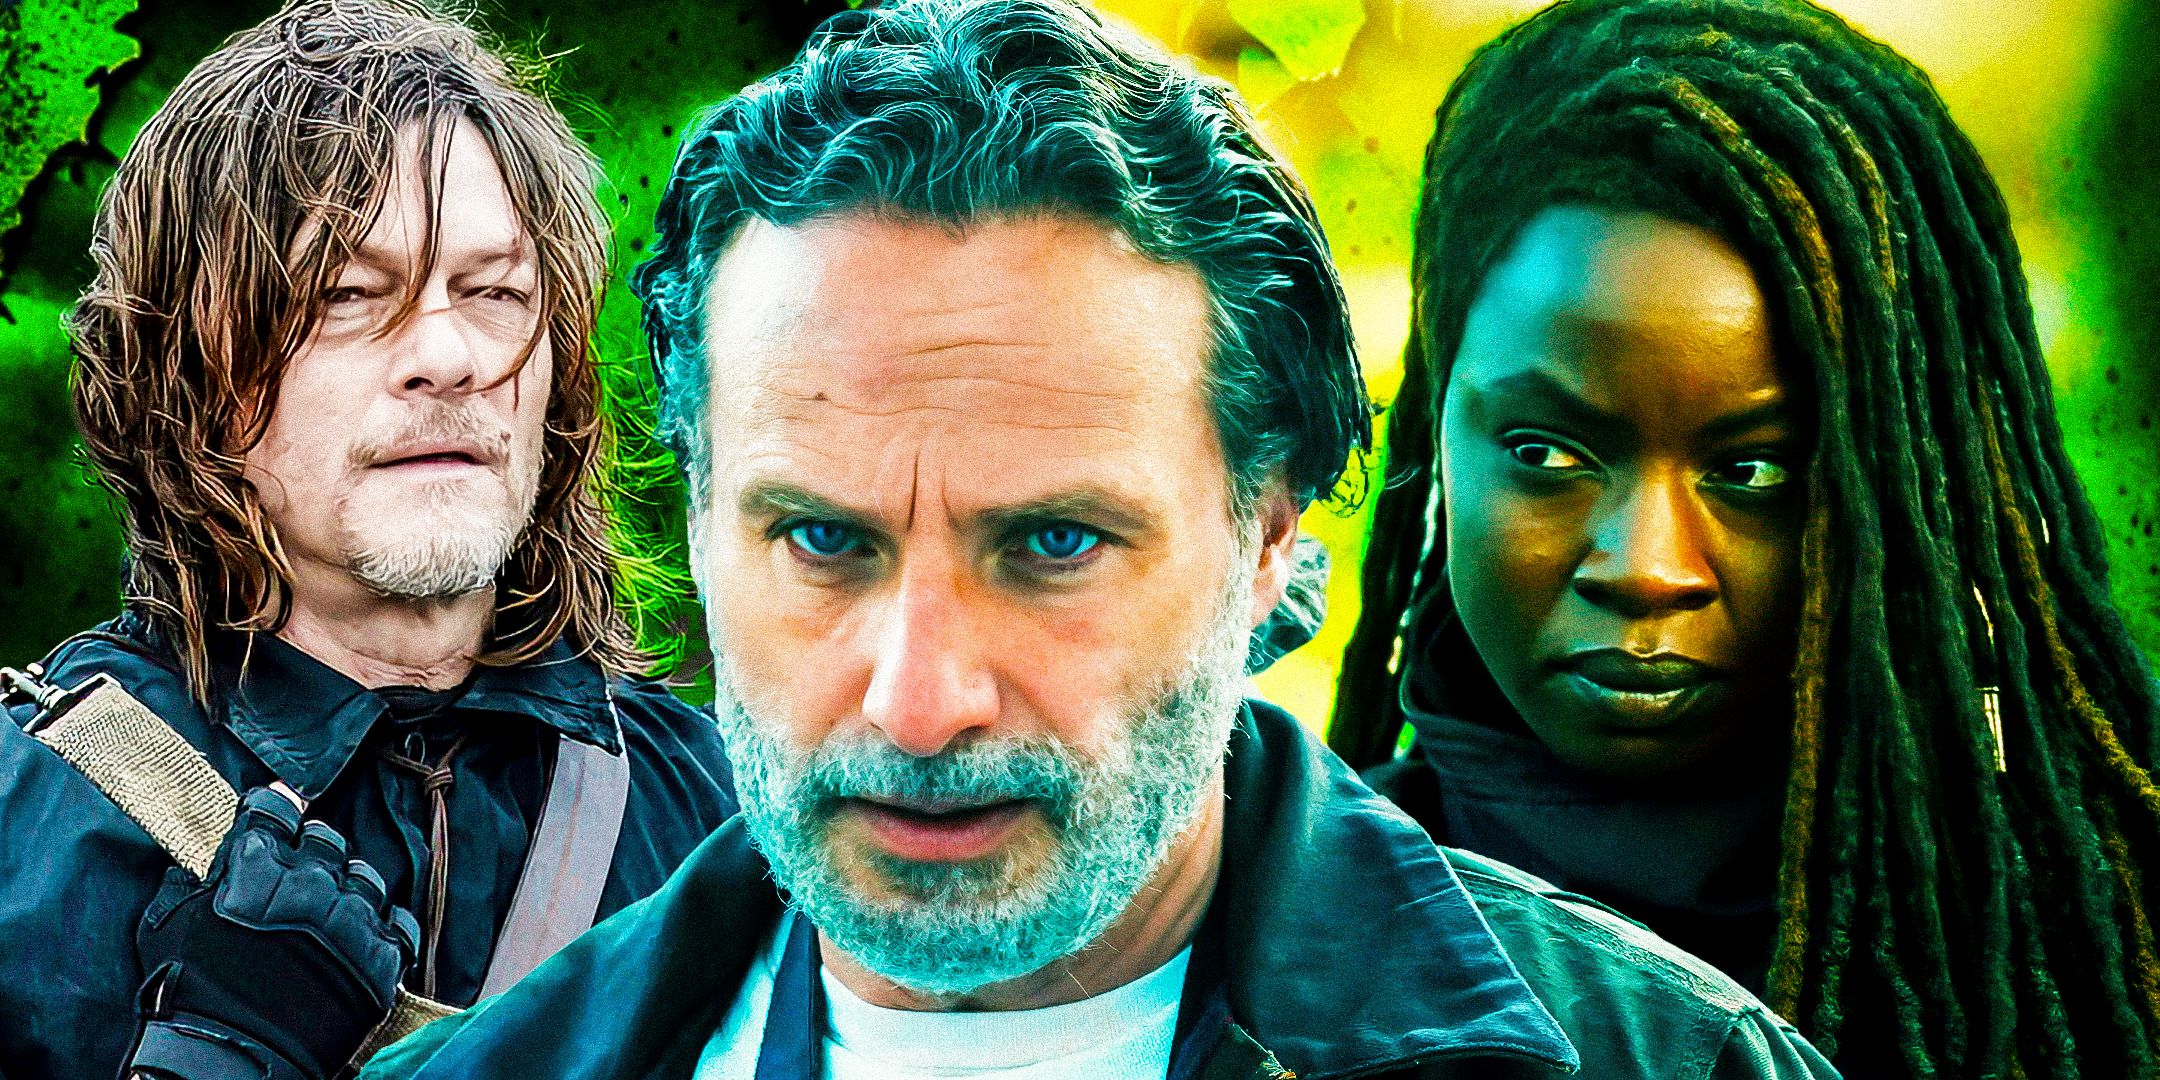 Norman Reedus as Daryl Dixon, Andrew Lincoln as Rick Grimes, and Danai Gurira as Michonne in The Walking Dead